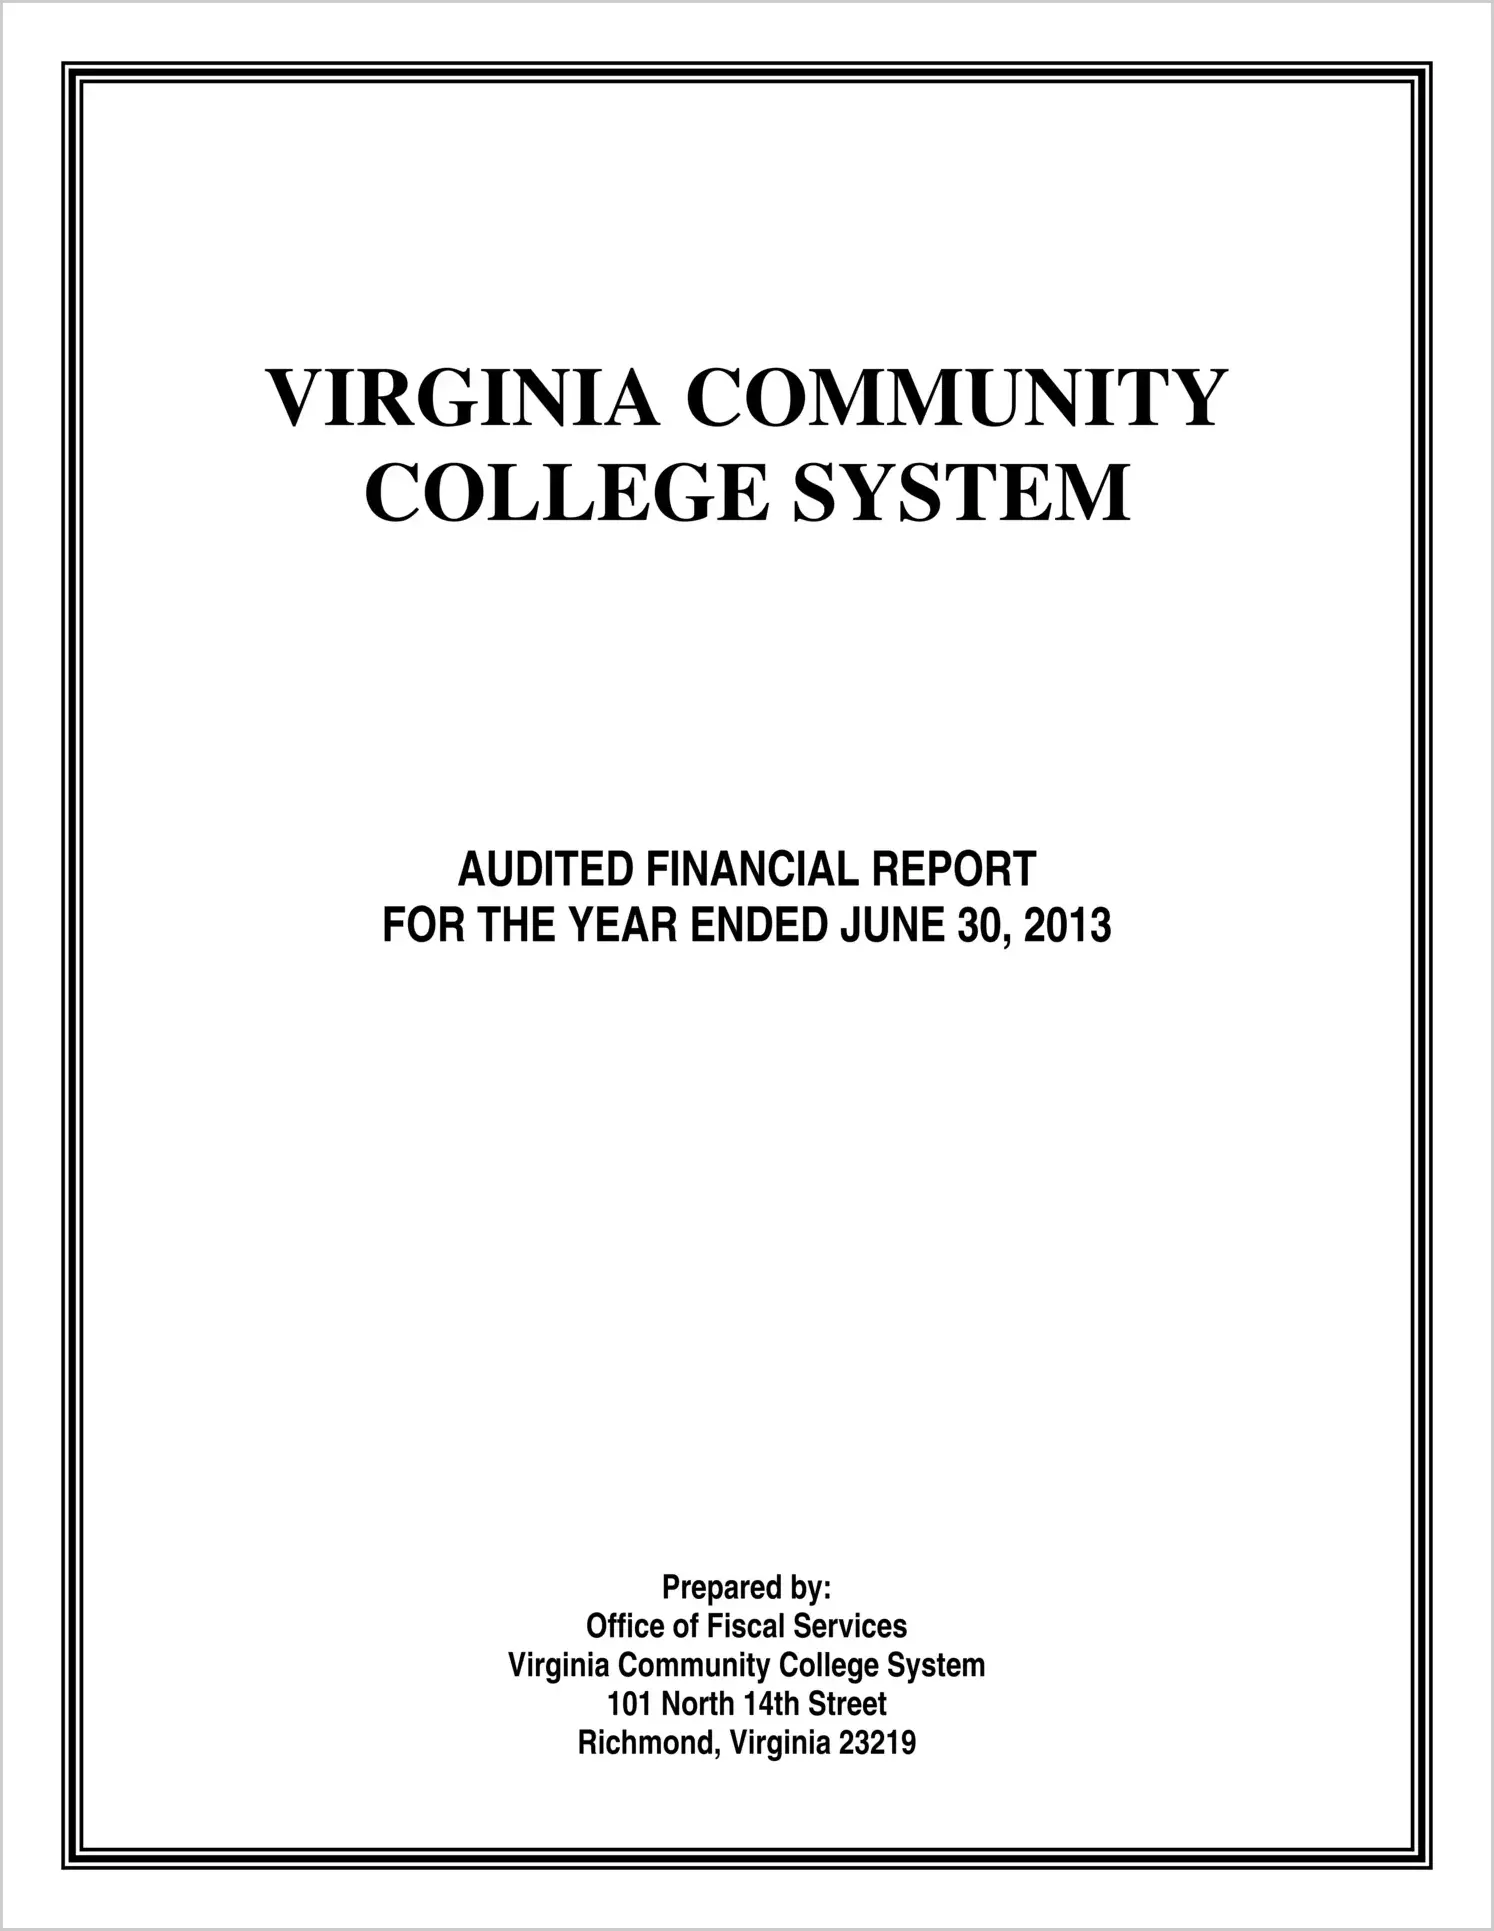 Virginia Community College System Financial Statement for the year ended June 30, 2013